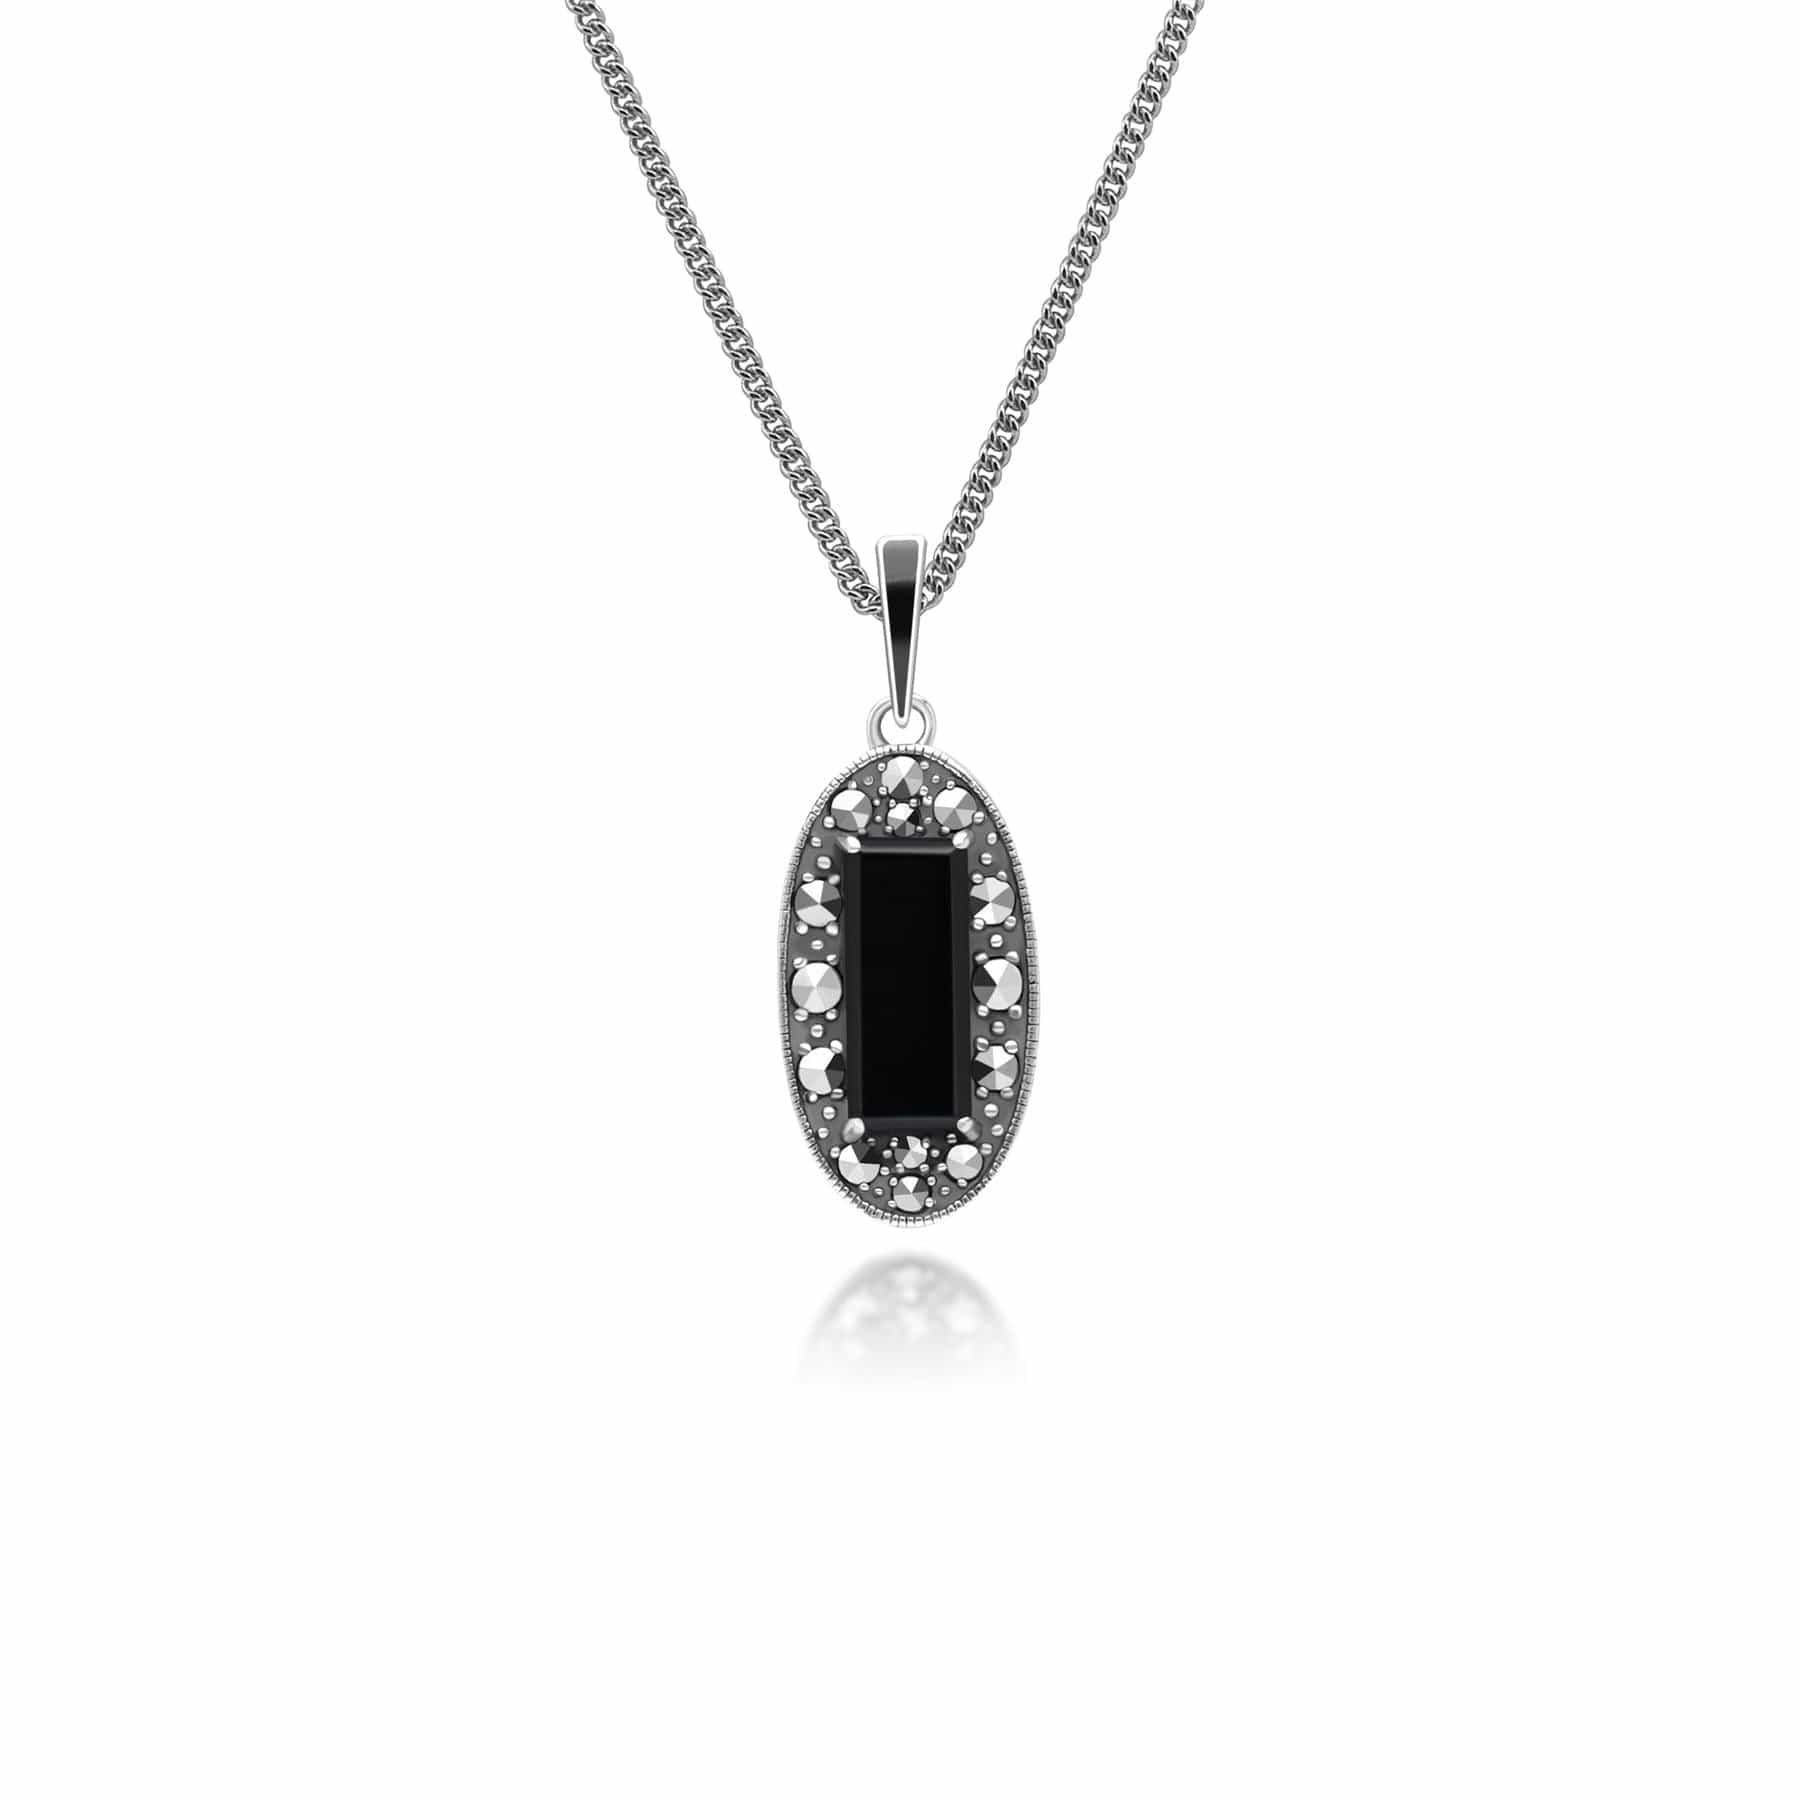 Art Deco Style Oval Onyx, Marcasite and Black Enamel Pendant Necklace in Sterling Silver 214P334402925 